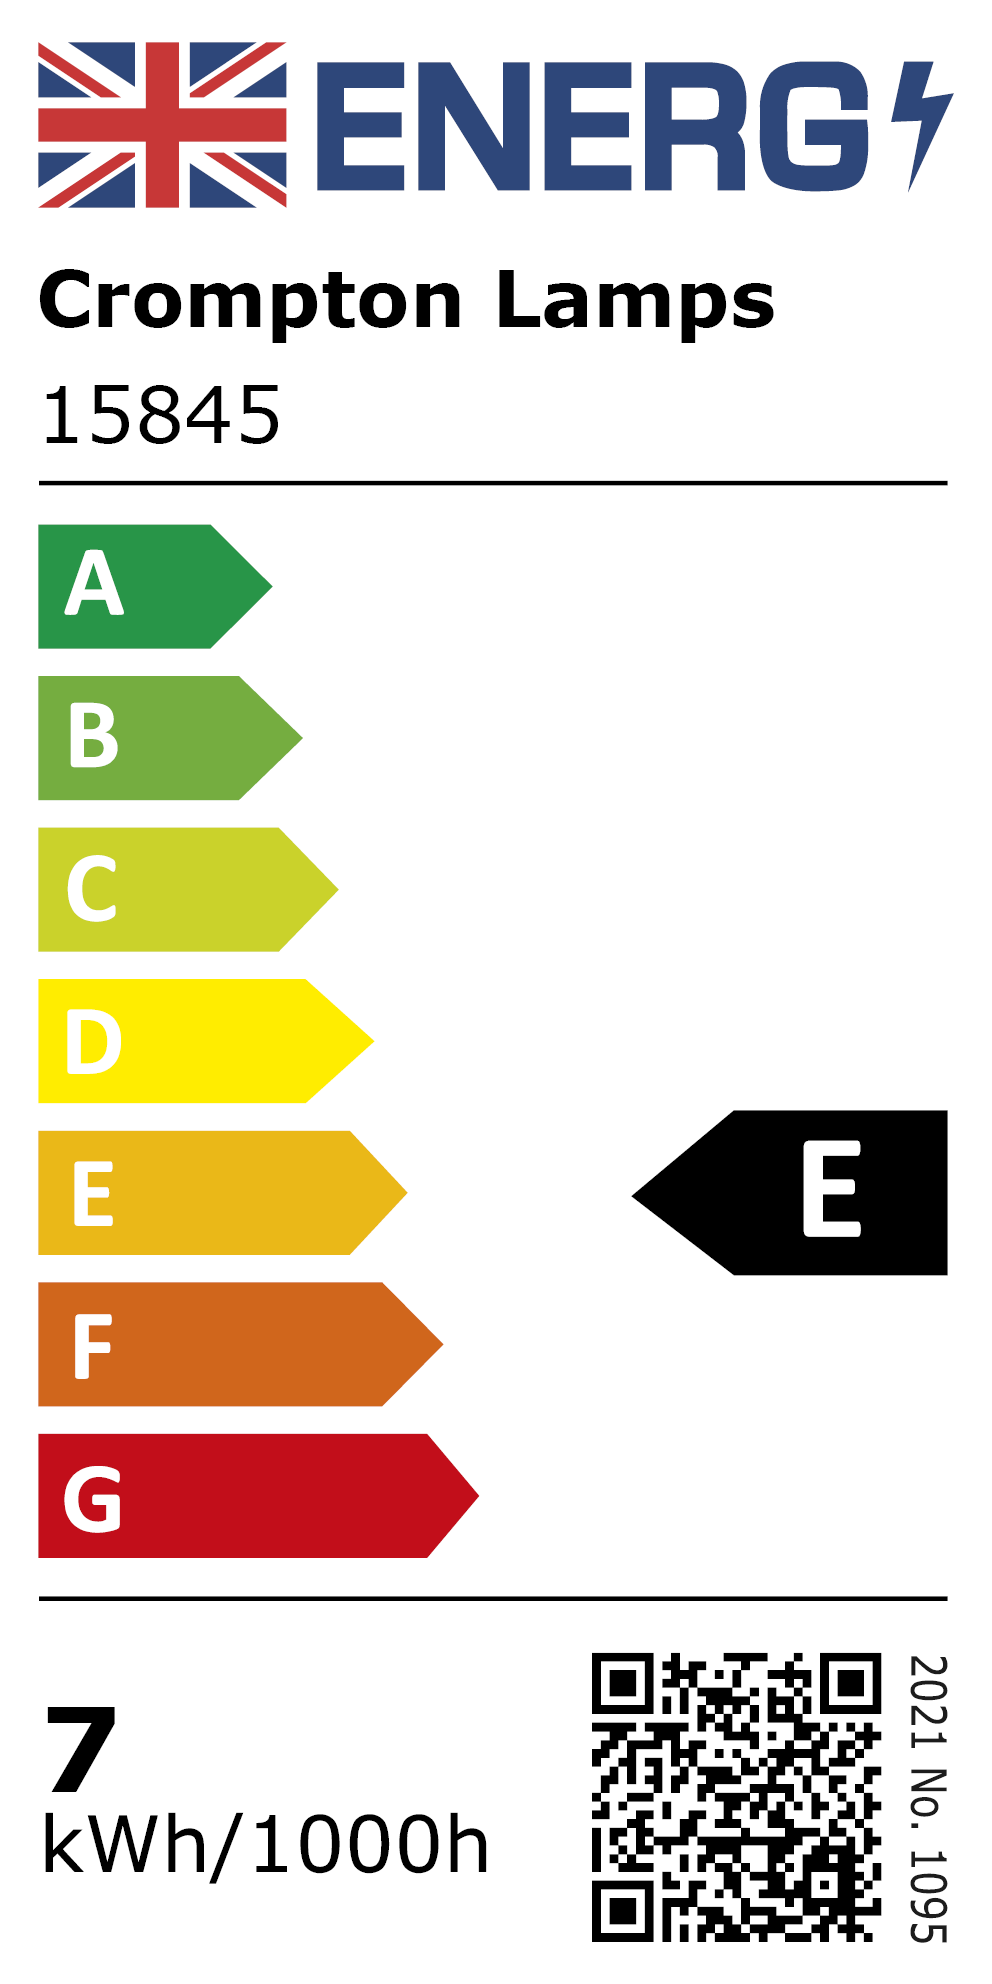 New 2021 Energy Rating Label: MPN 15845